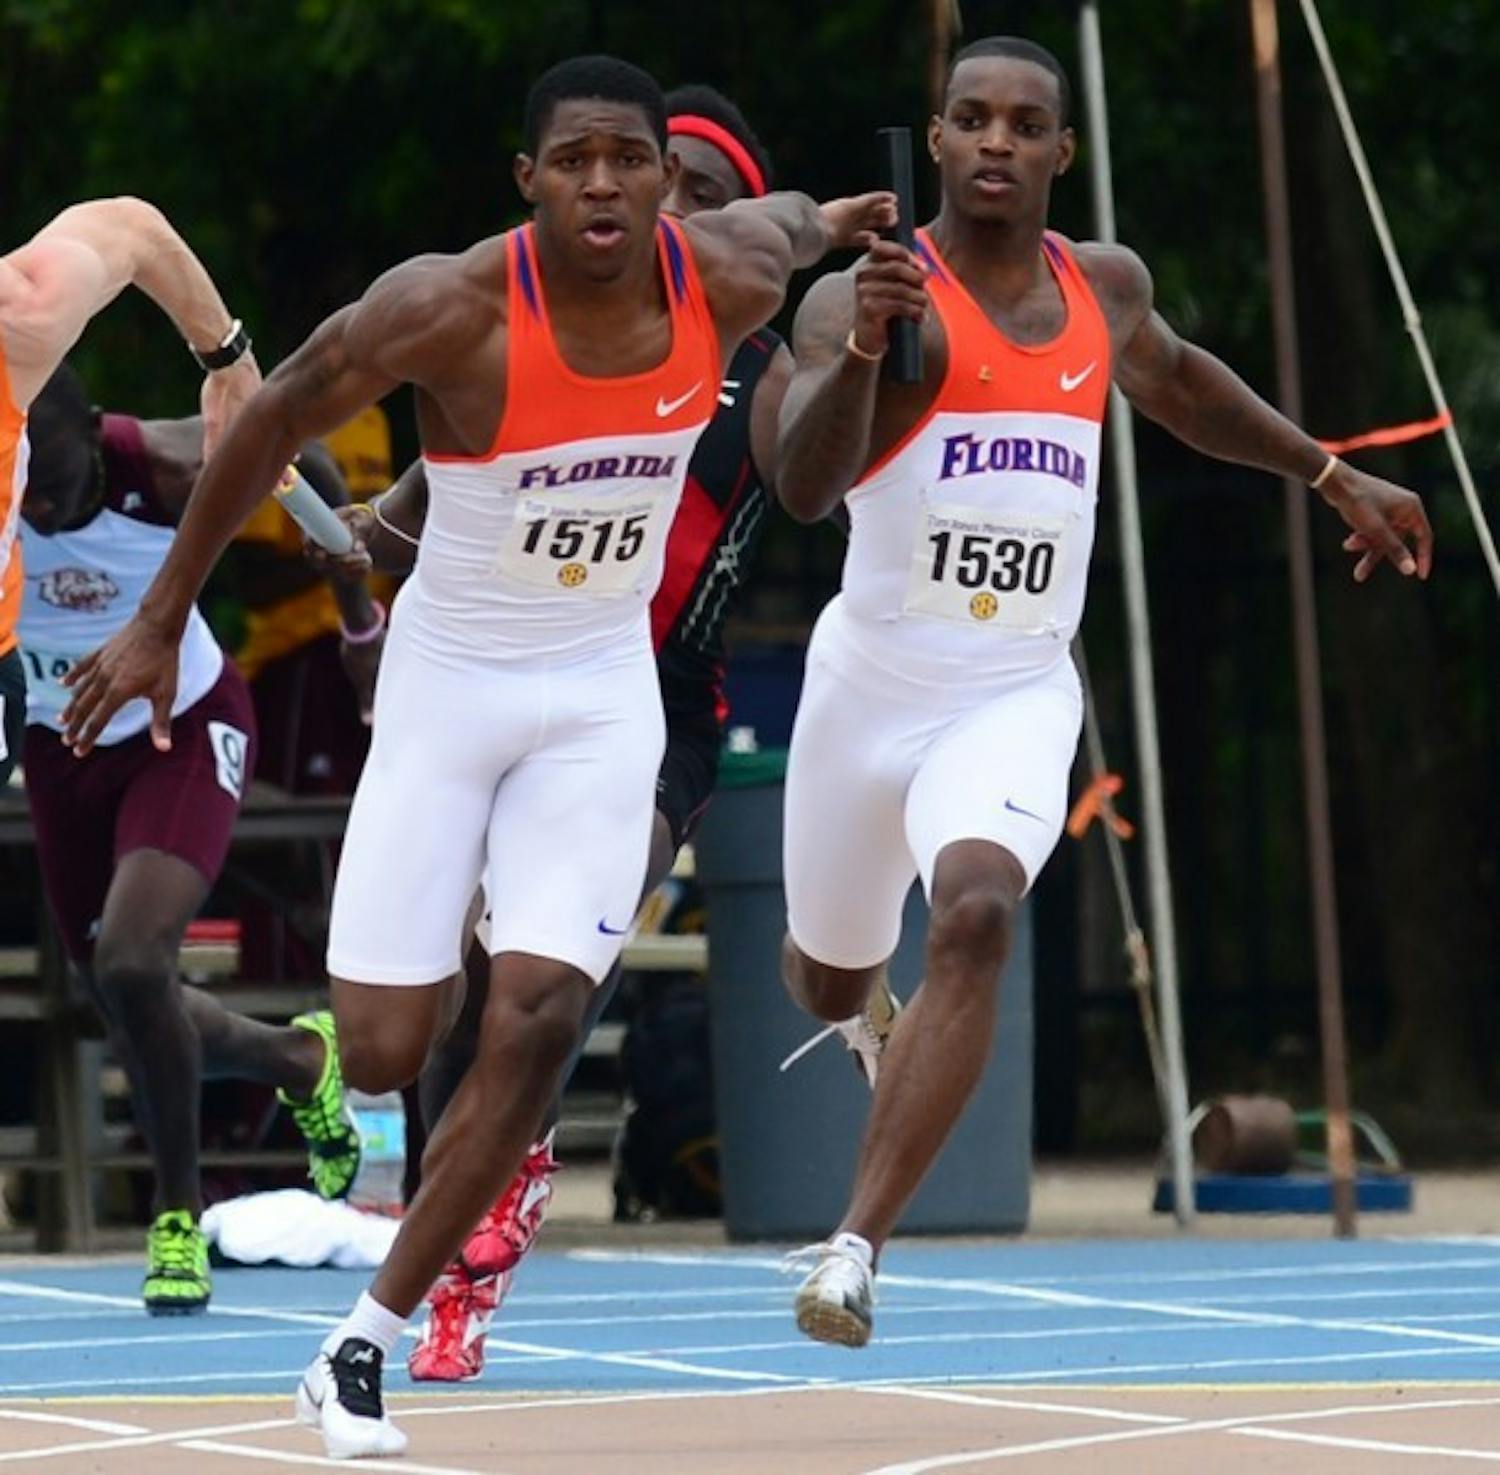 Leonardo Seymore hands the baton to Dedric Dukes in&nbsp; the 4x400 relay at the Tom Jones Classic on April 21, 2012. Dukes won the men's 200m at the Florida Relays on Friday.